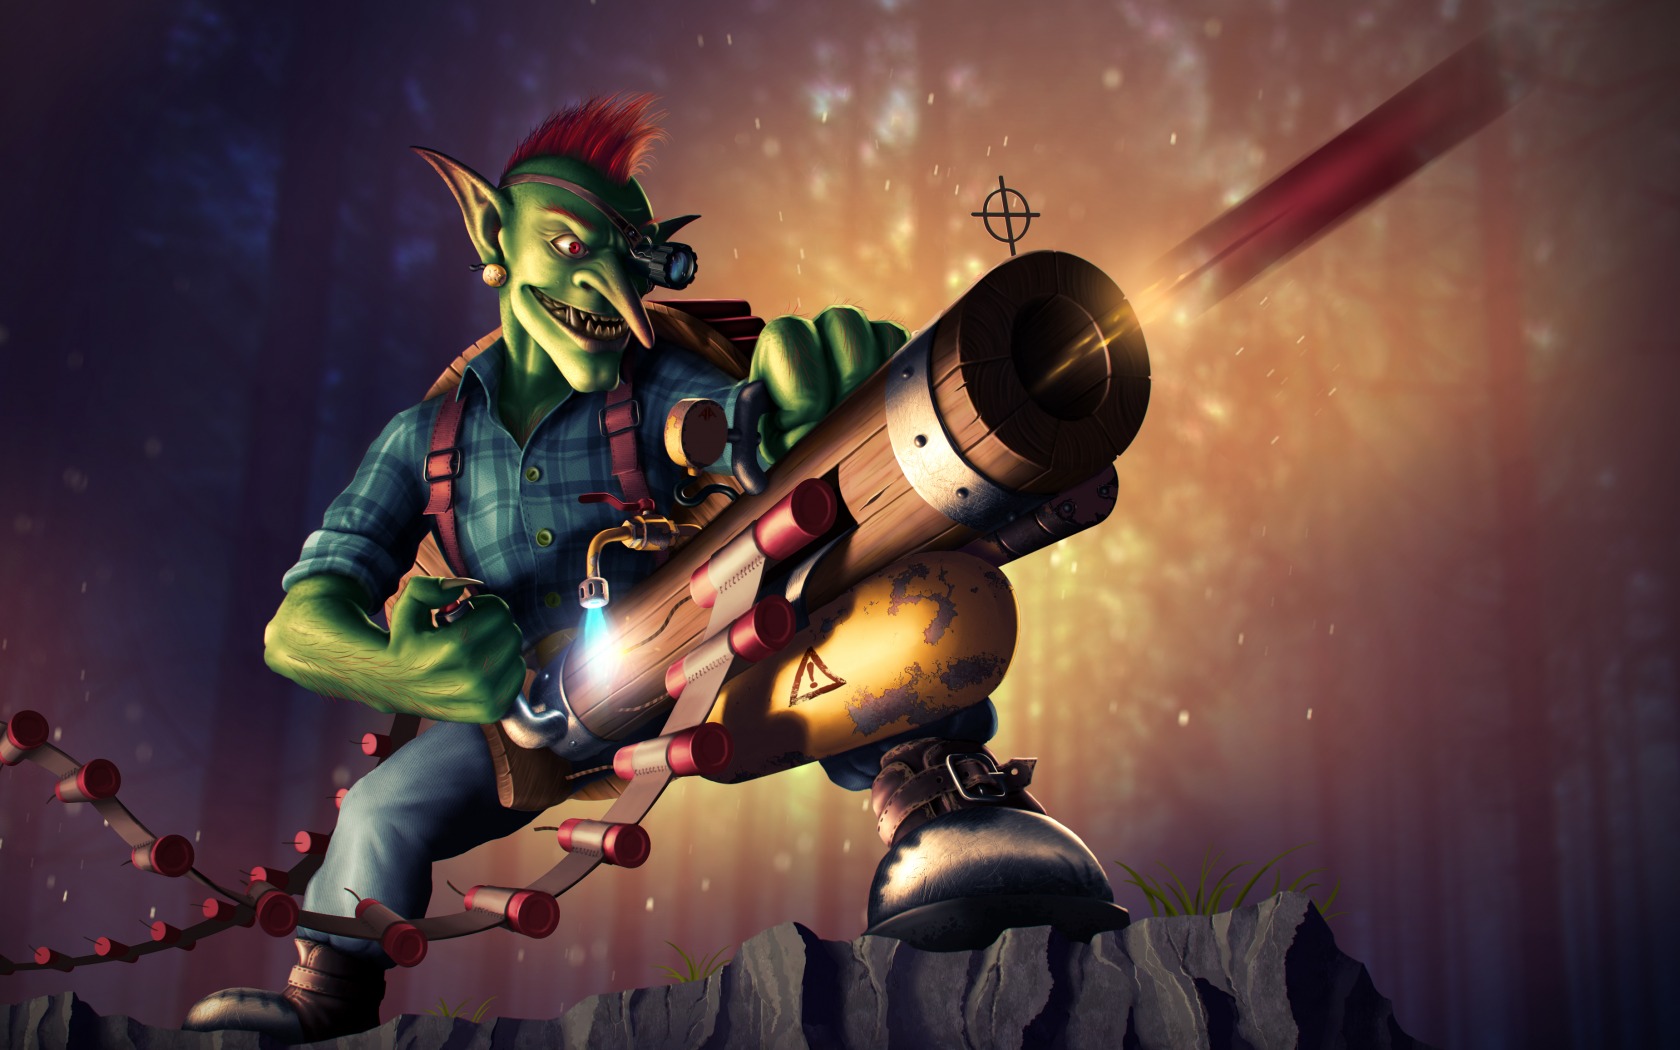 Hearthstone Hearthstone Heroes Of Warcraft Goblin Wallpaper Hd Games 4k Wallpapers Images Photos And Background Wallpapers Den